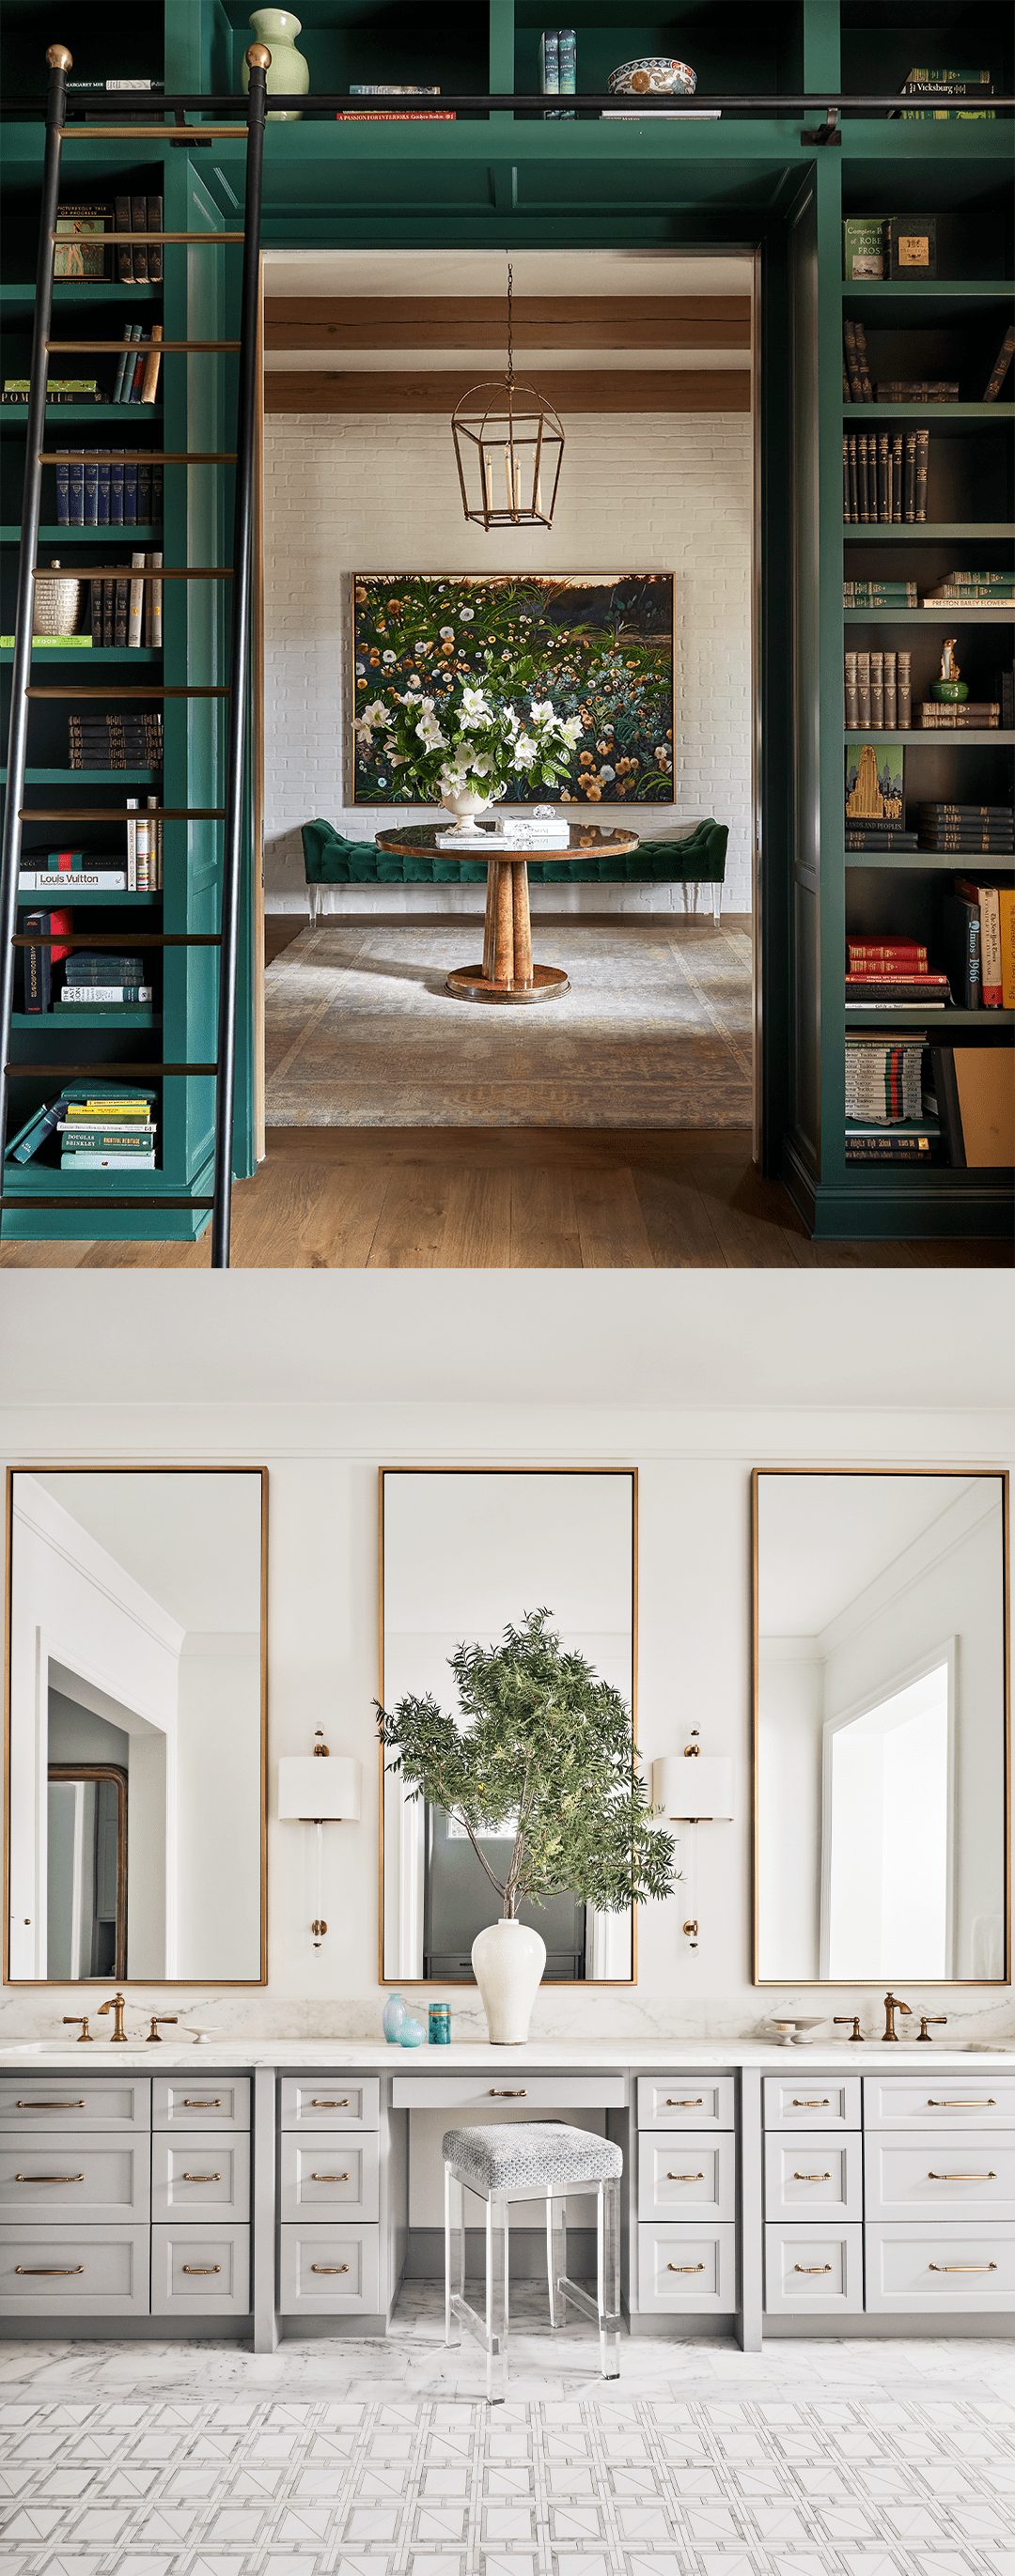 Green library entrance on top and gray marble bathroom on bottom.